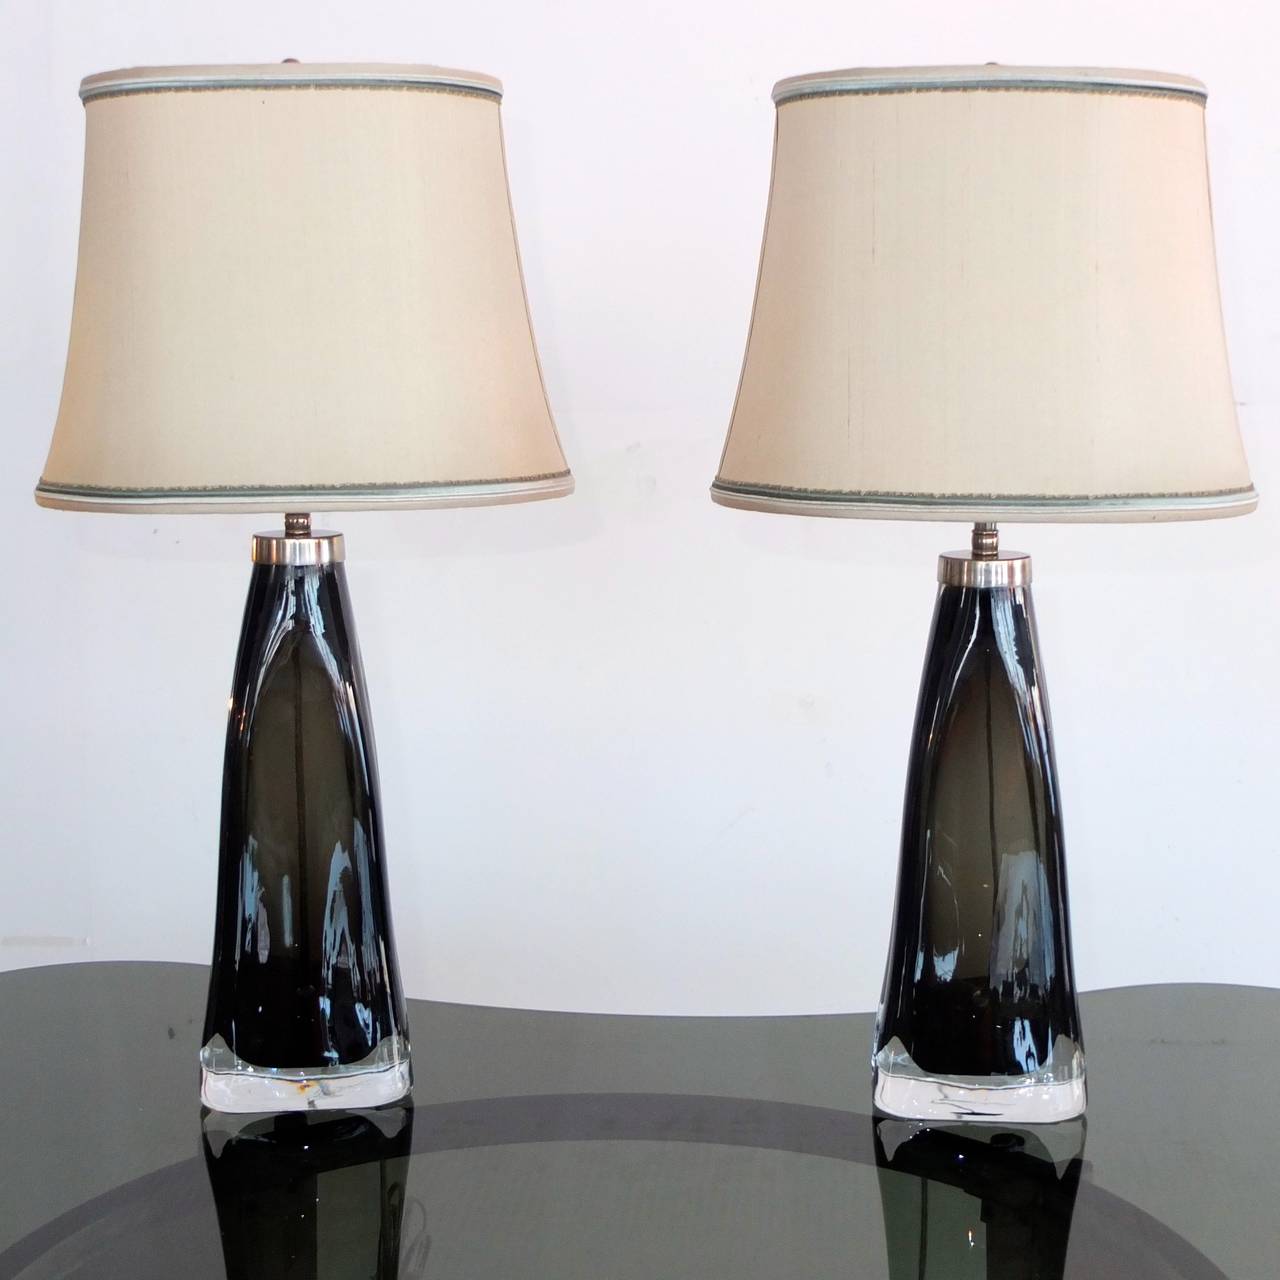 Beautiful pair of smoked cased glass table lamps by Carl Fagerlund for Orrefors, Sweden, circa 1960's with nickel fittings. Totally rewired and re-lamped with high quality double sockets with pull chains. Adjustable lampshade risers. Glass is